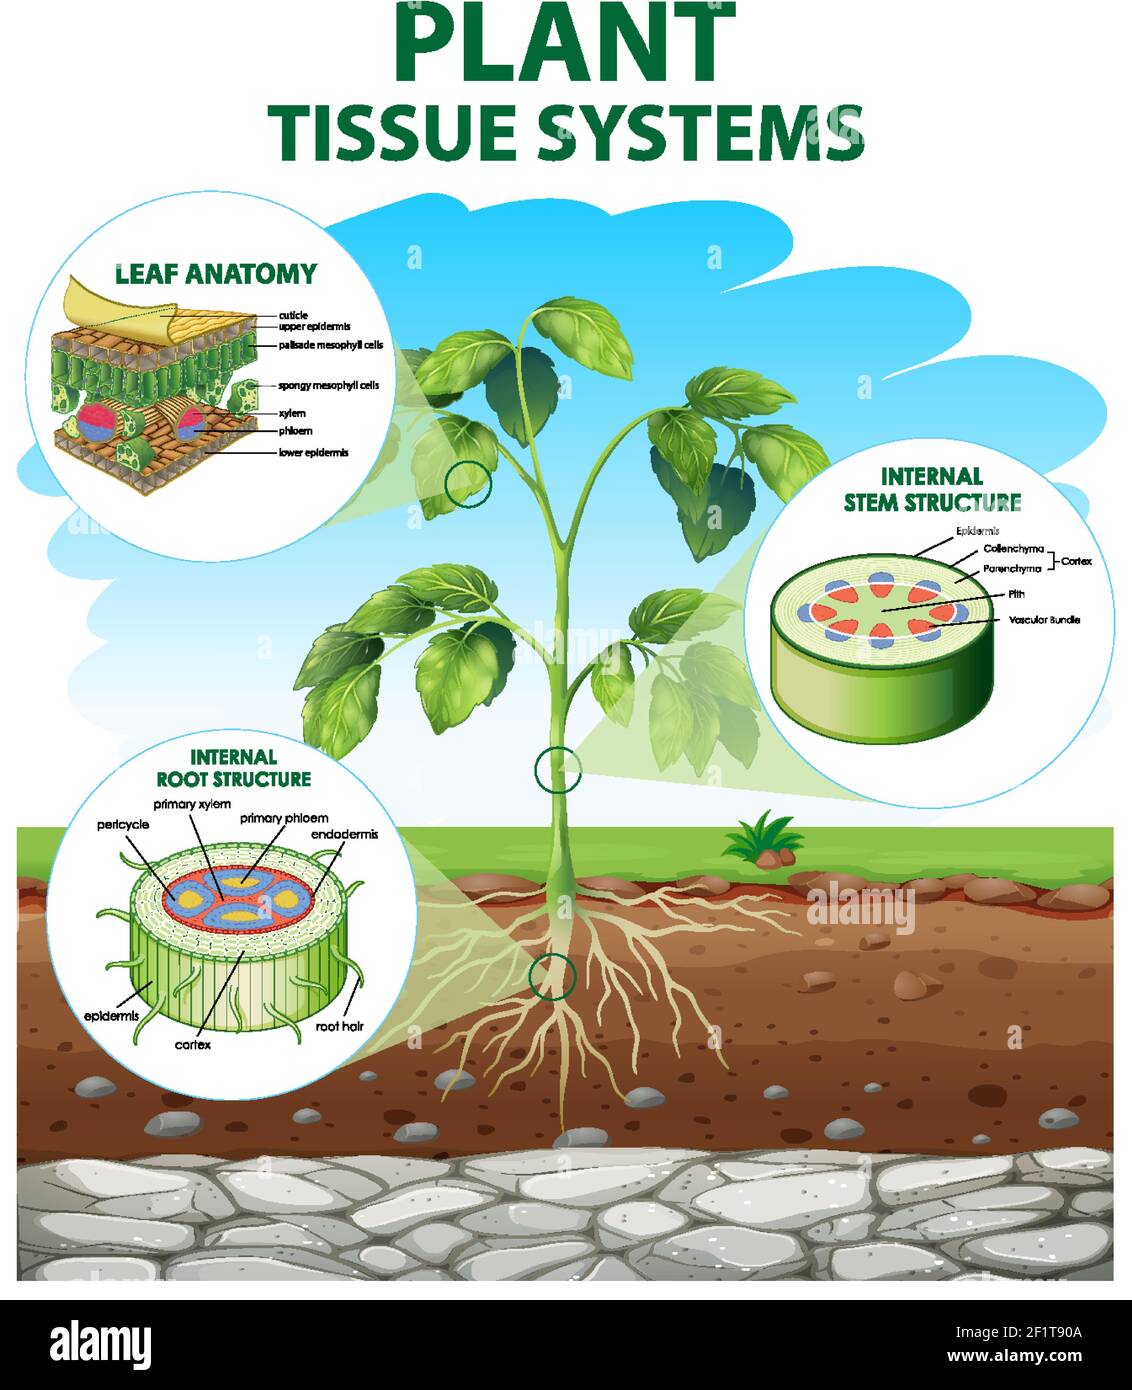 Diagram Showing Plant Tissue Systems Illustration Stock Vector Image